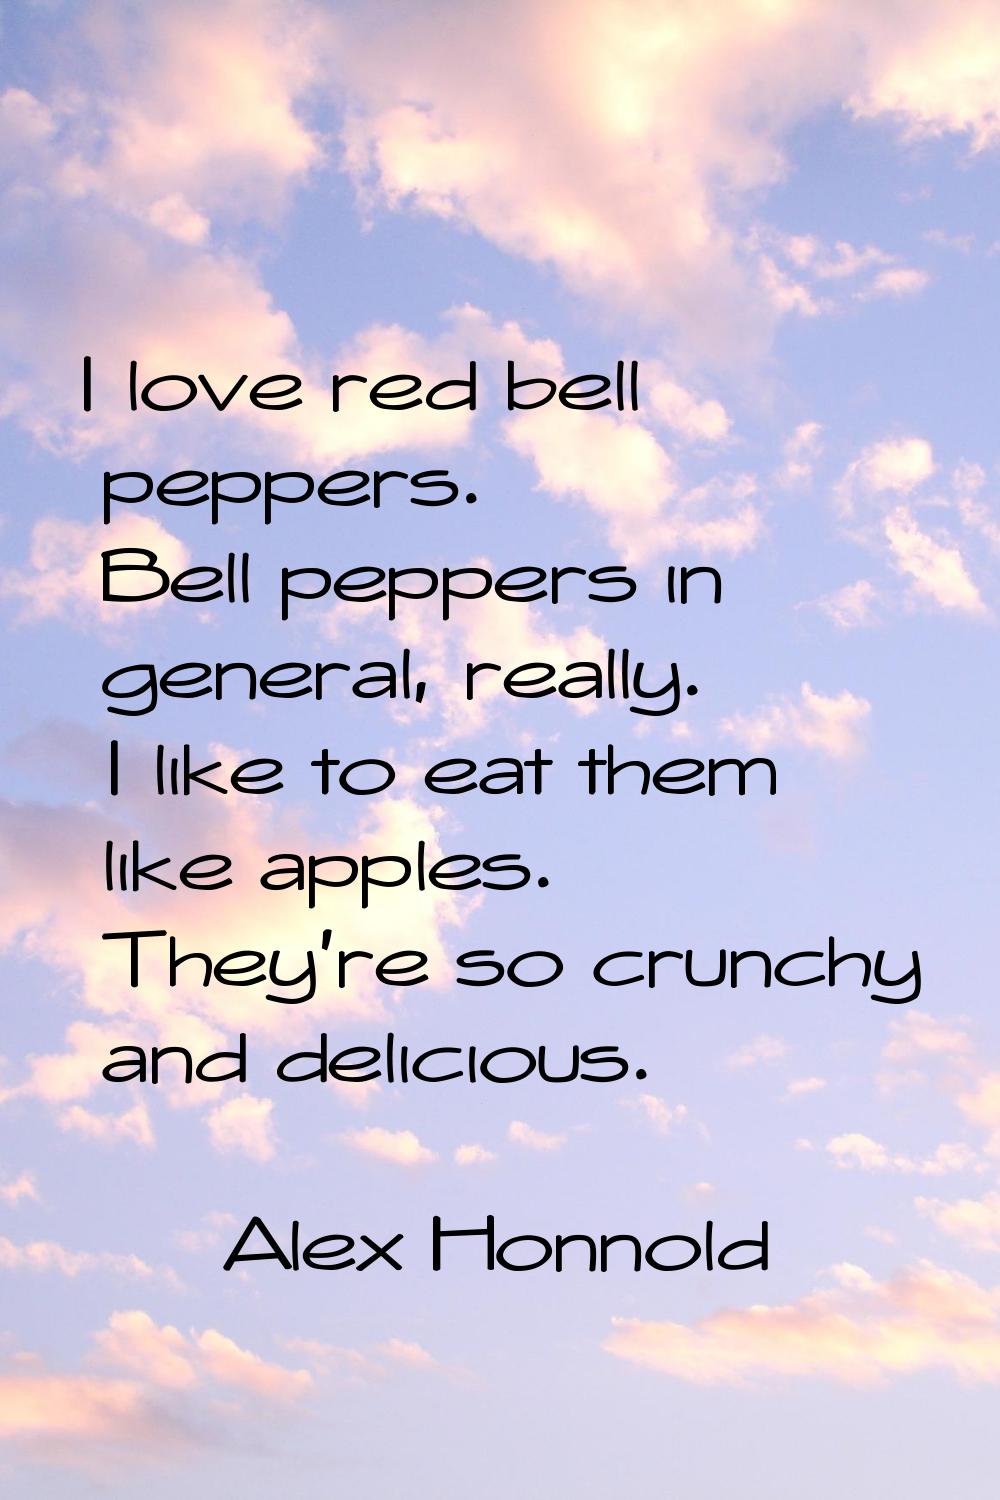 I love red bell peppers. Bell peppers in general, really. I like to eat them like apples. They're s